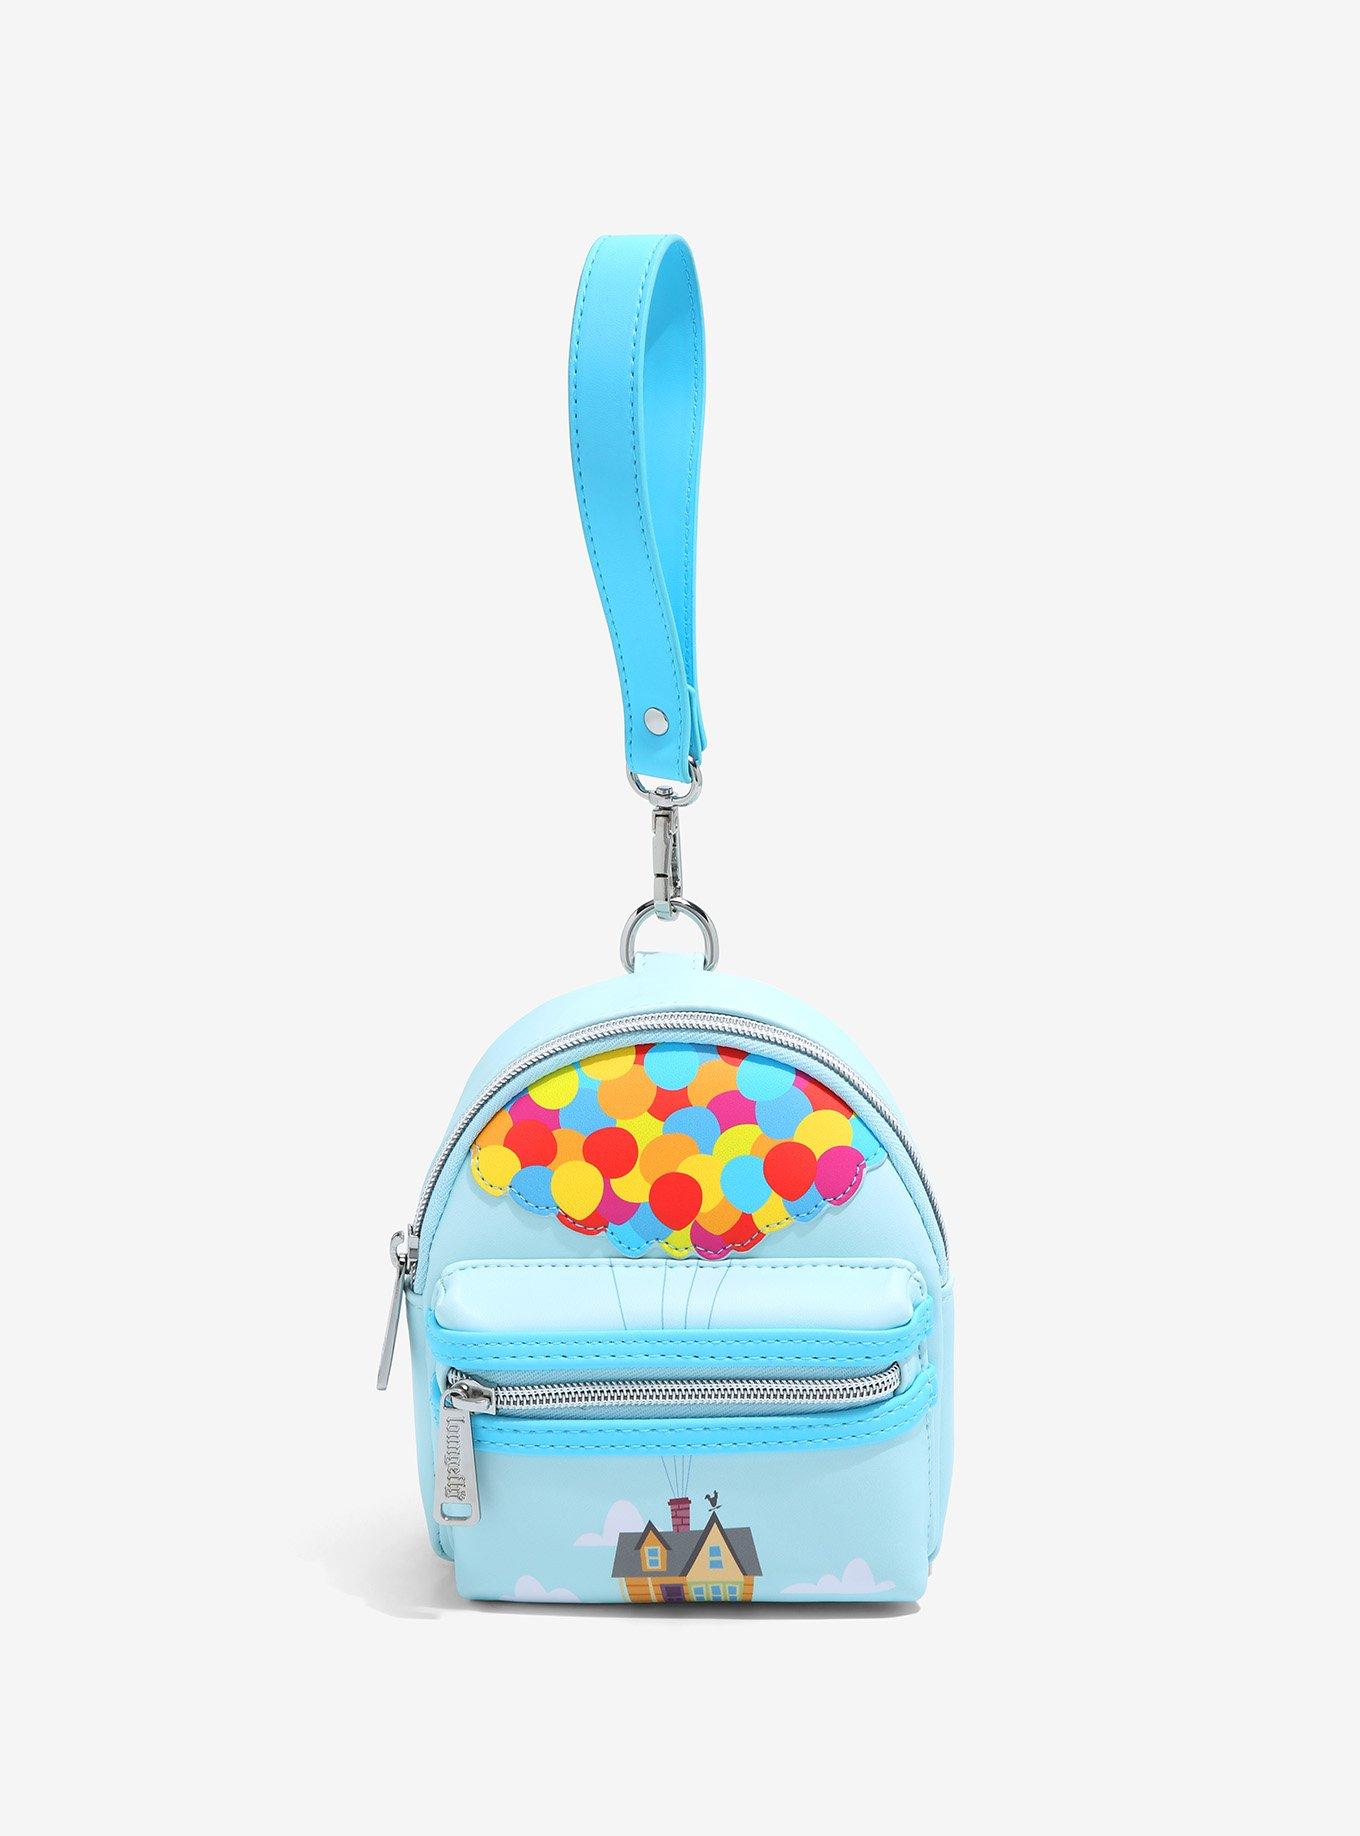 Loungefly Disney Mickey Mouse Balloons Handbag - BoxLunch Exclusive